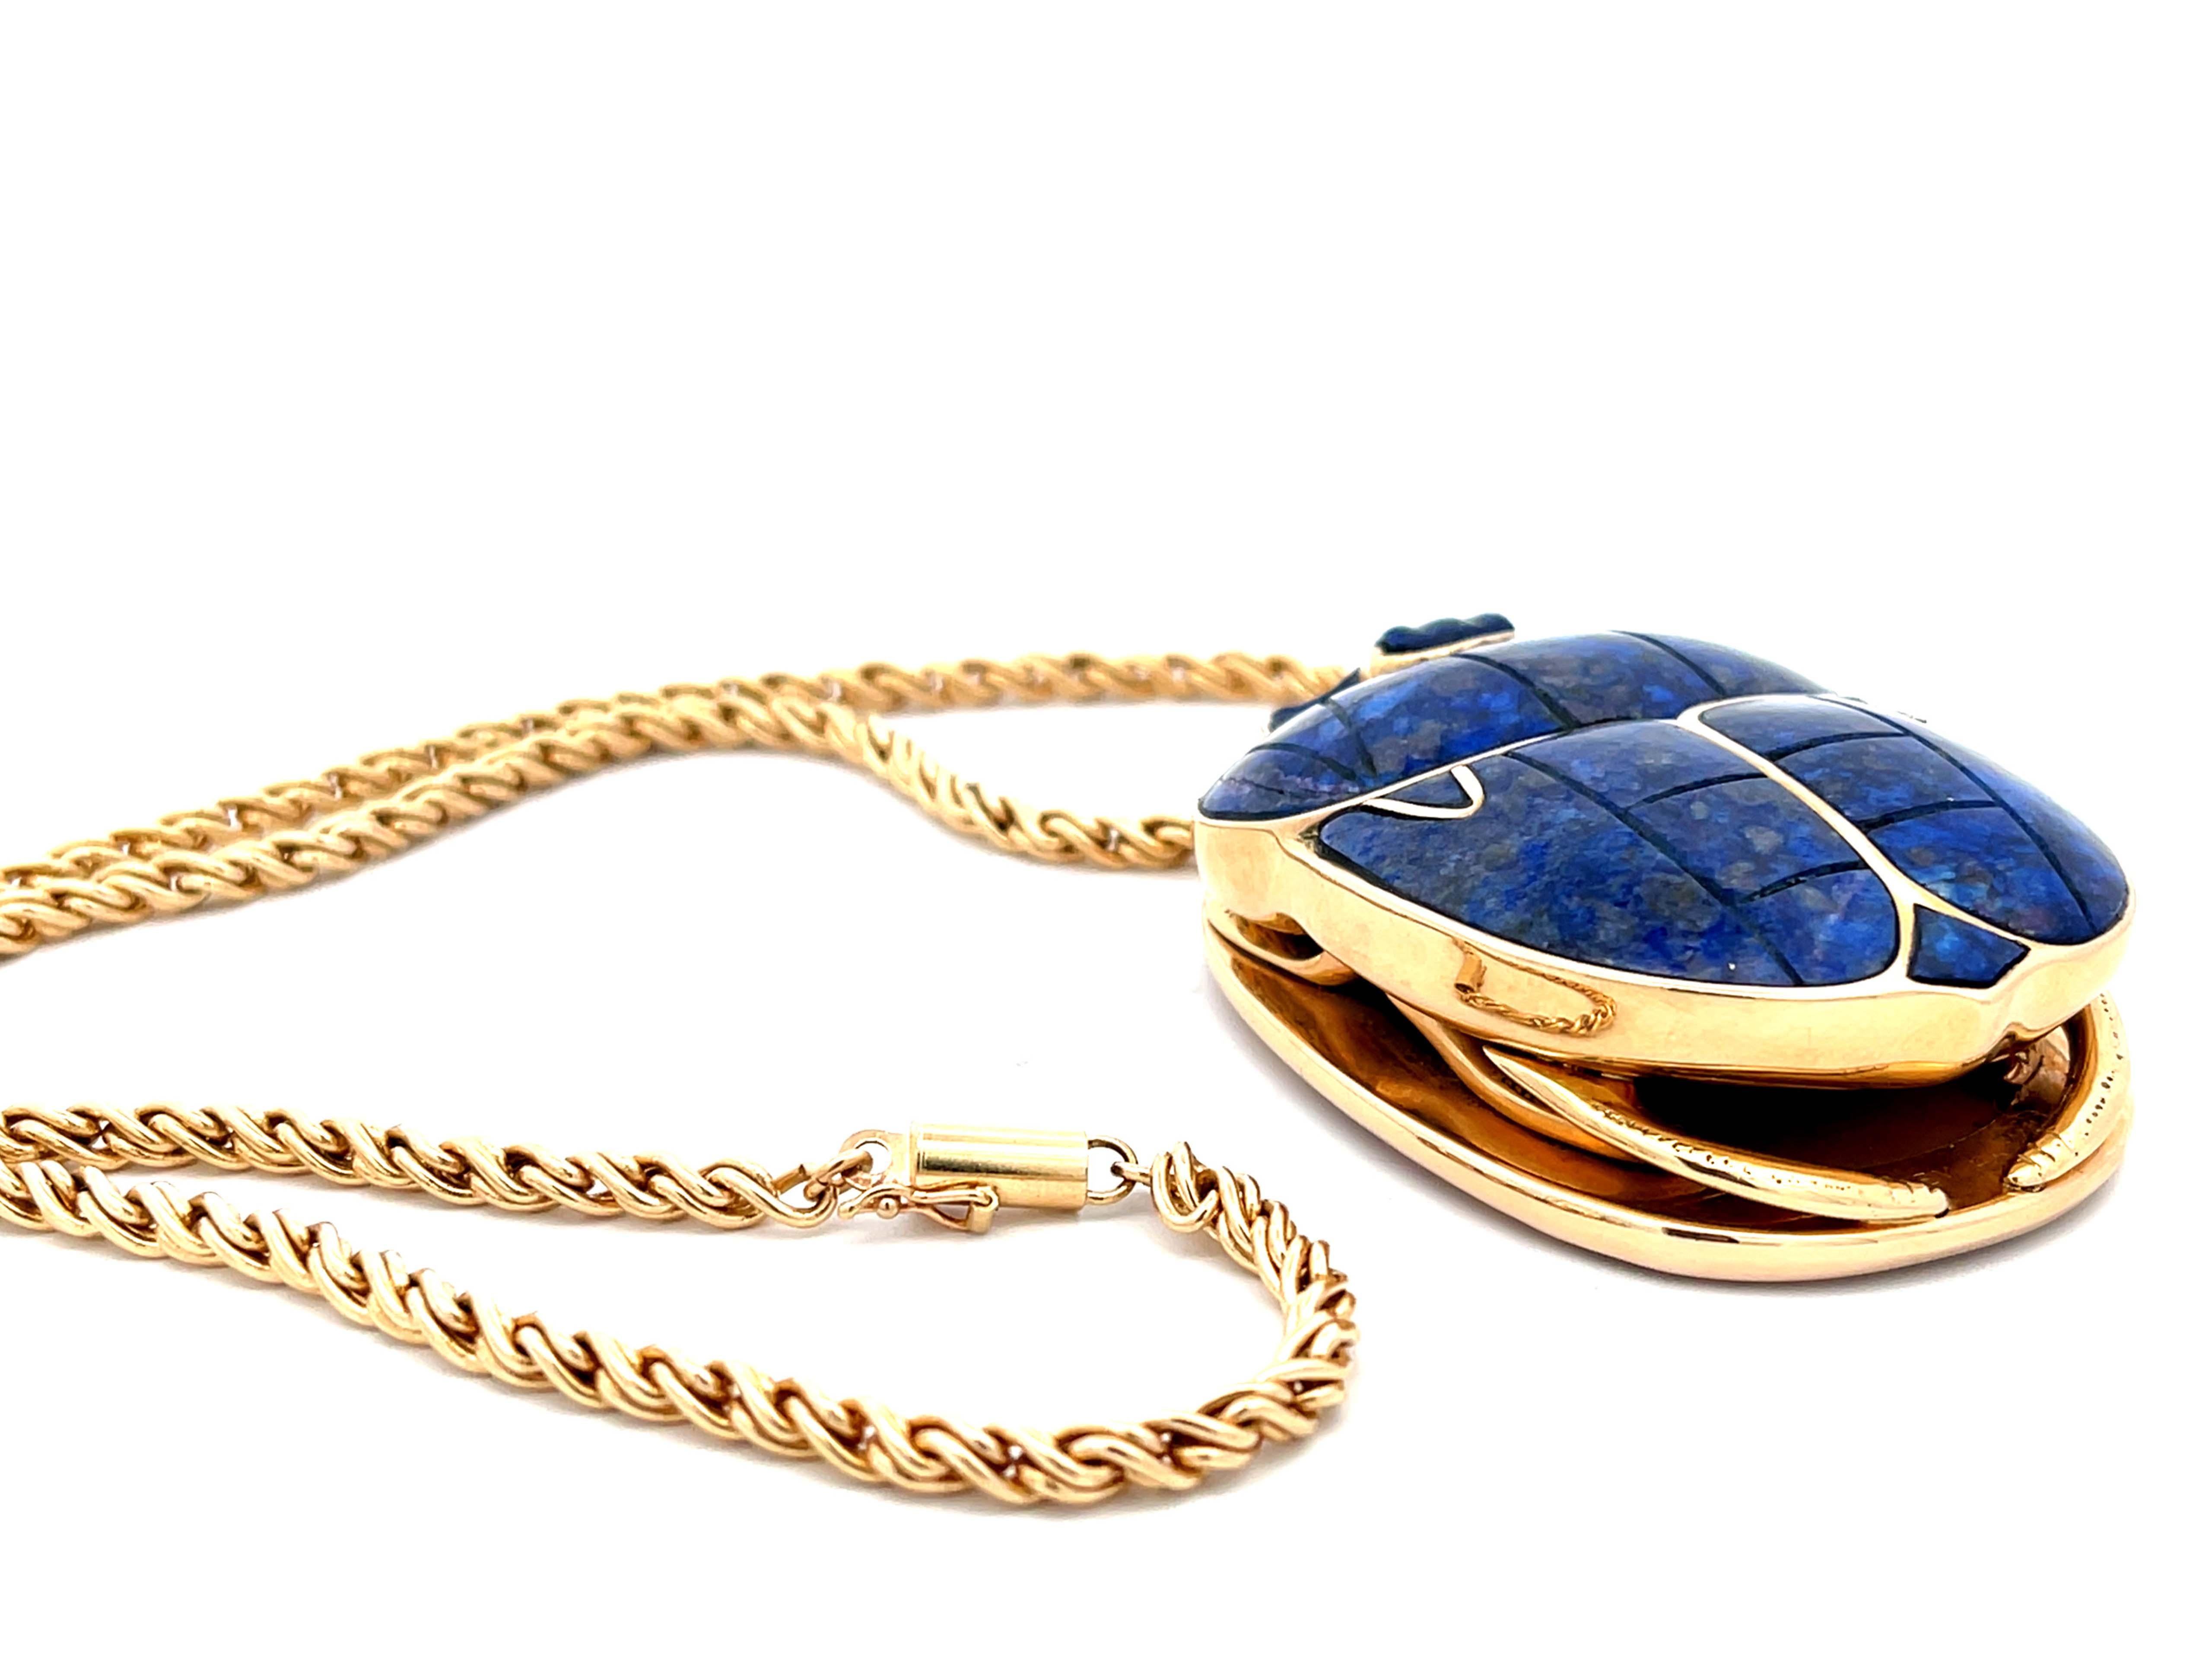 Egyptian Lapis Scarab Beetle Pendant with Woven Chain in 14k Yellow Gold For Sale 2